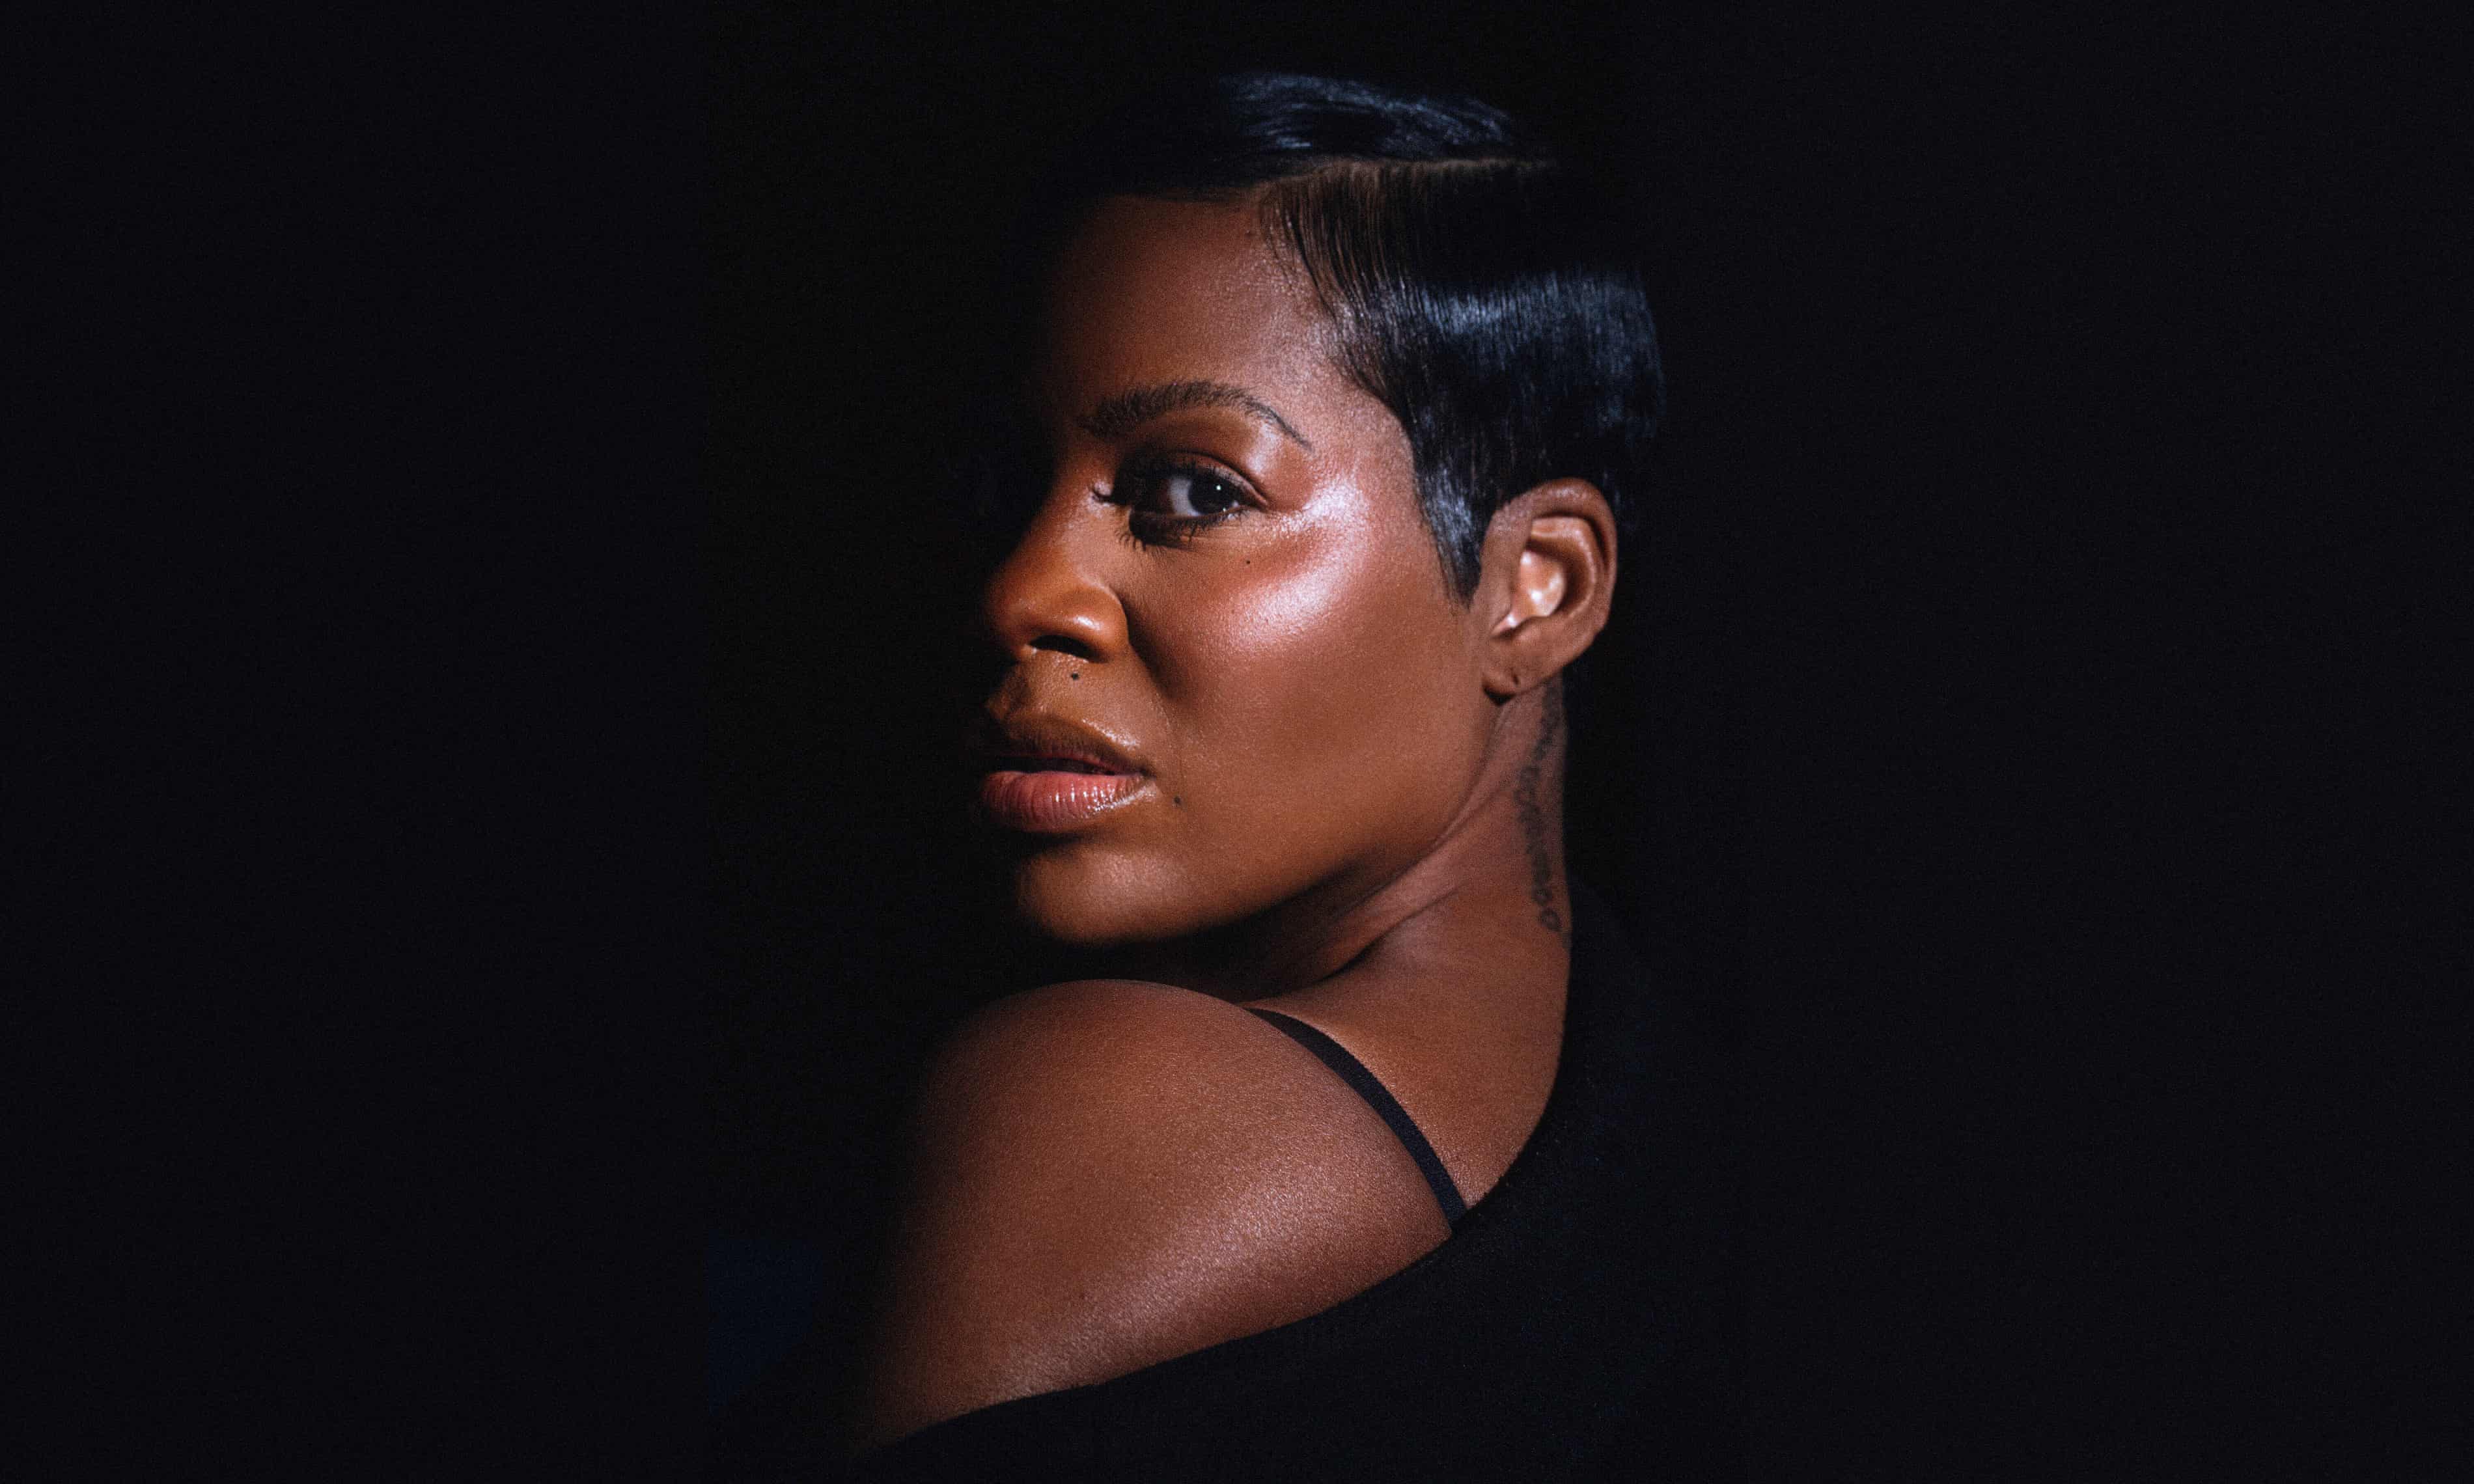 ‘I had to stop therapy. I needed the pain’: Fantasia Barrino on trauma, triumph and filming The Color Purple